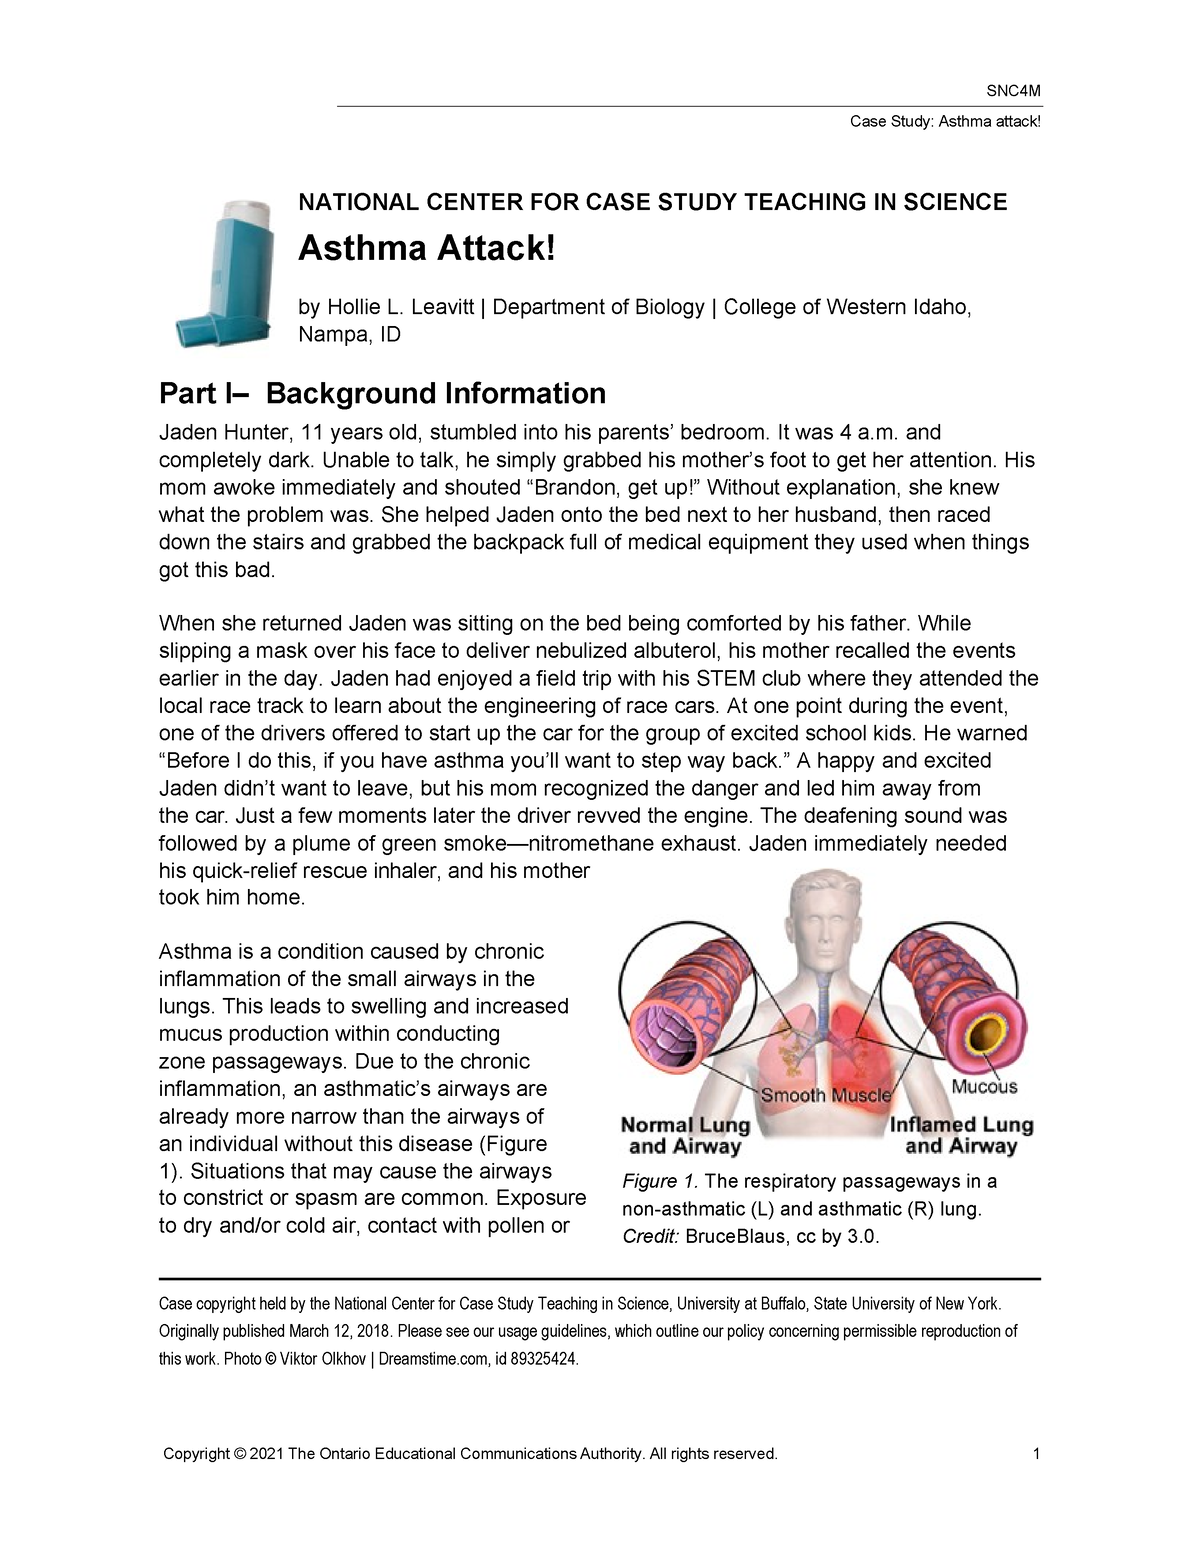 national center for case study teaching in science asthma attack